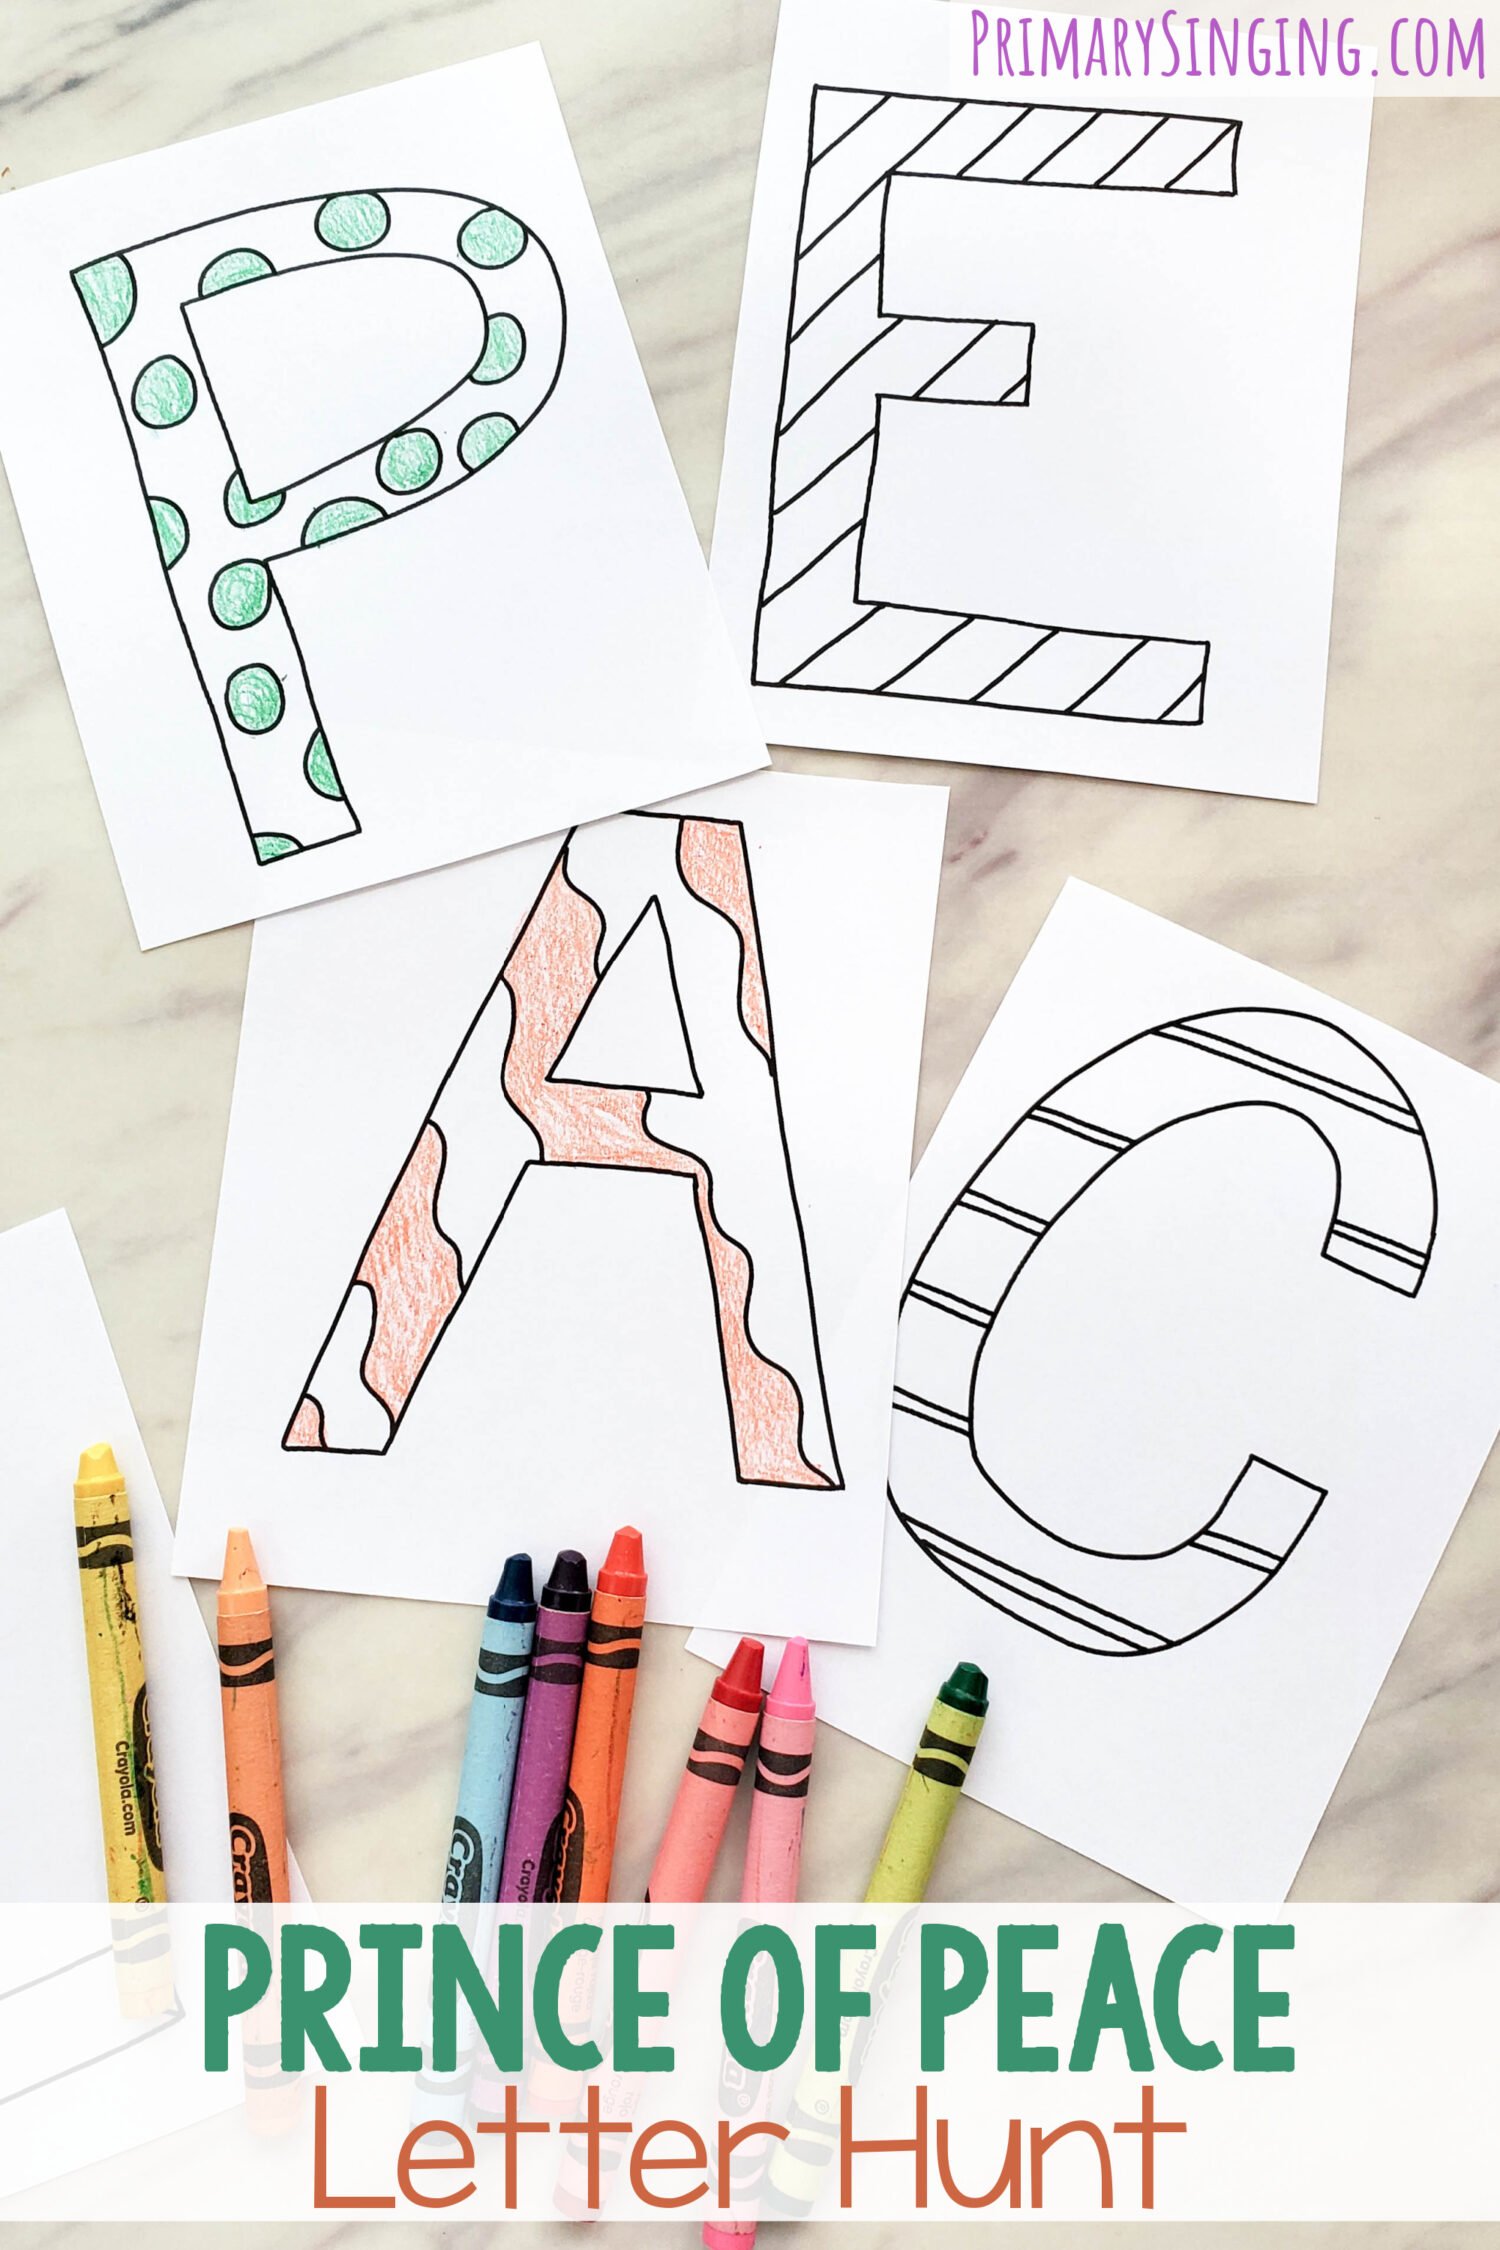 Prince of Peace Letter Hunt search for the 5 letters P-E-A-C-E as you sing through the song with lots of singing repetition! A fun no-prep singing time game! Then, share ways that you feel Peace and how Jesus Christ brings you peace! Printable song helps for LDS Primary music leaders.